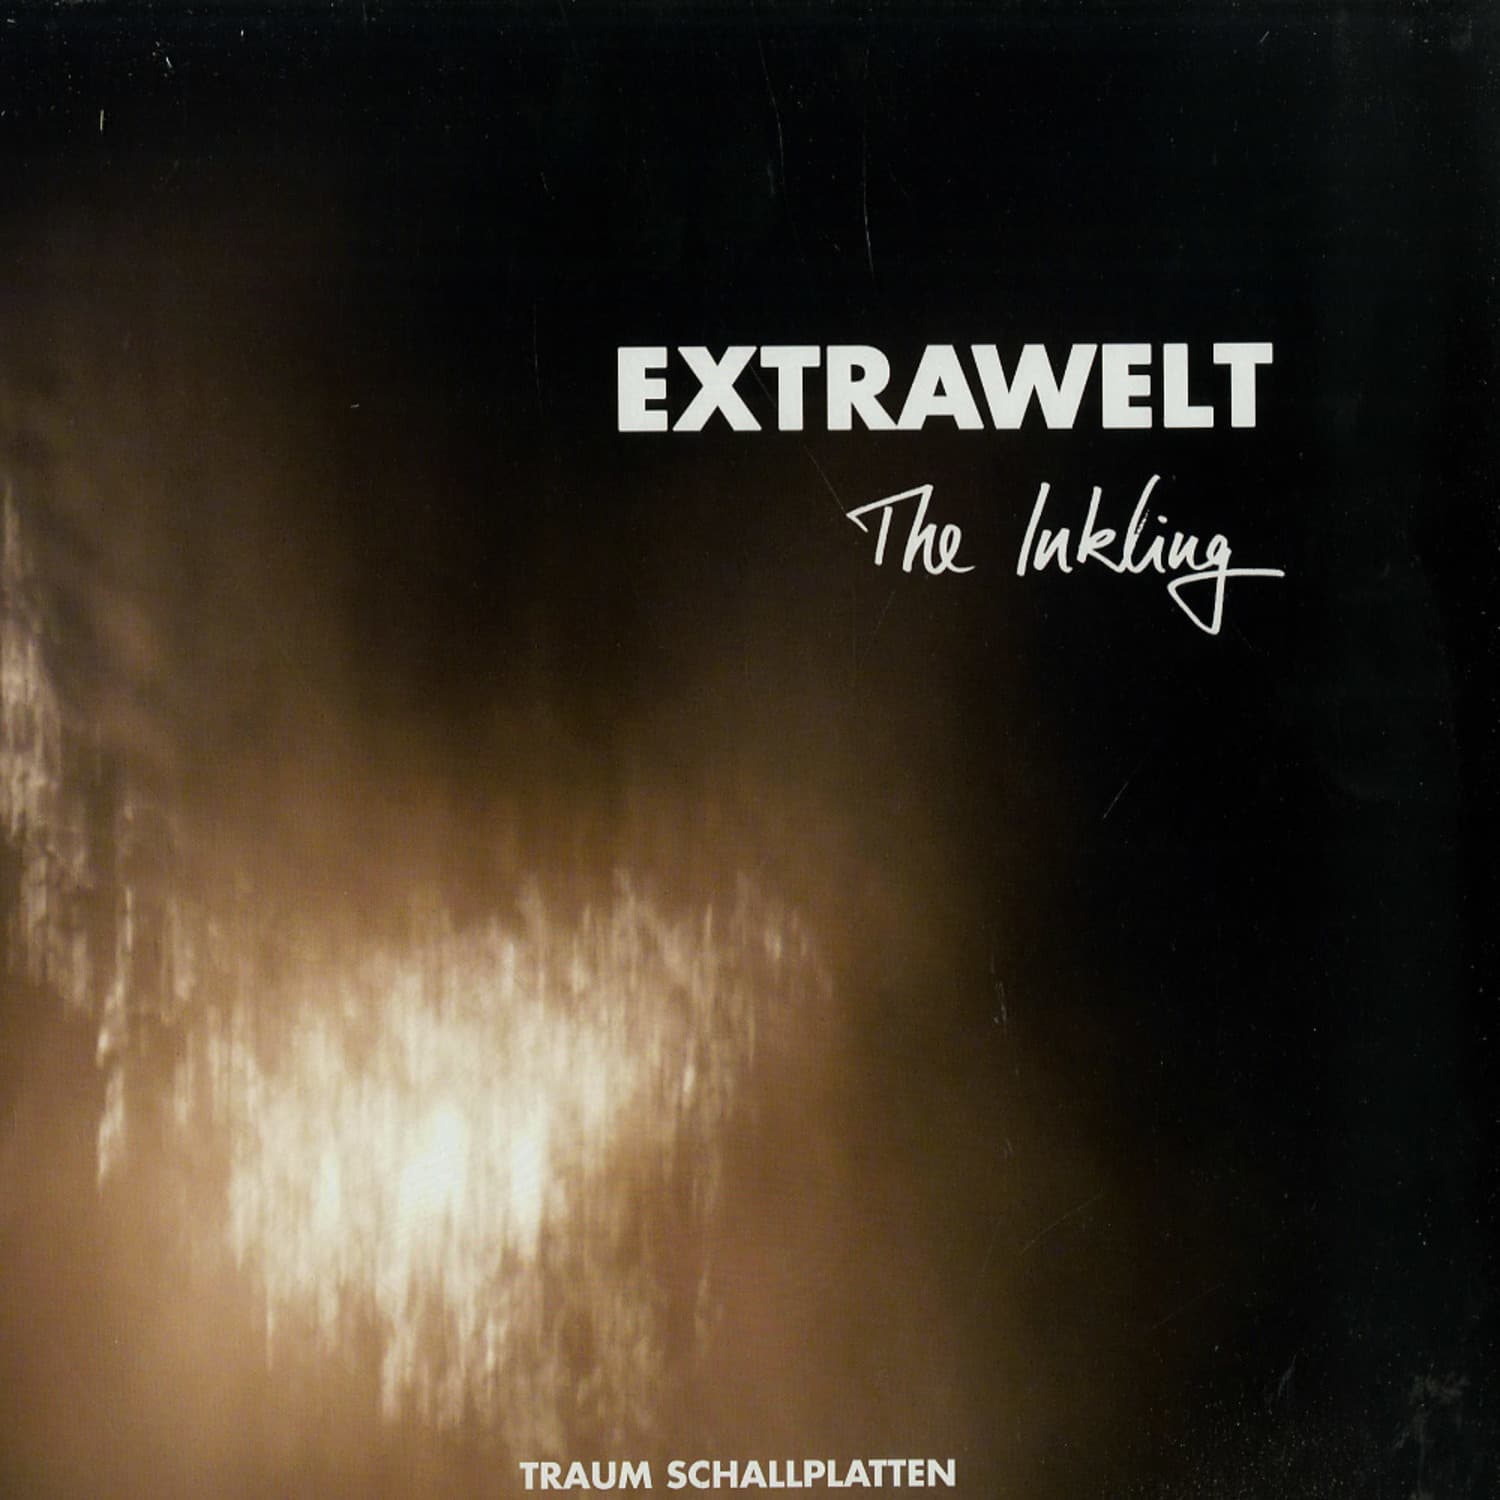 Extrawelt - THE INKLING